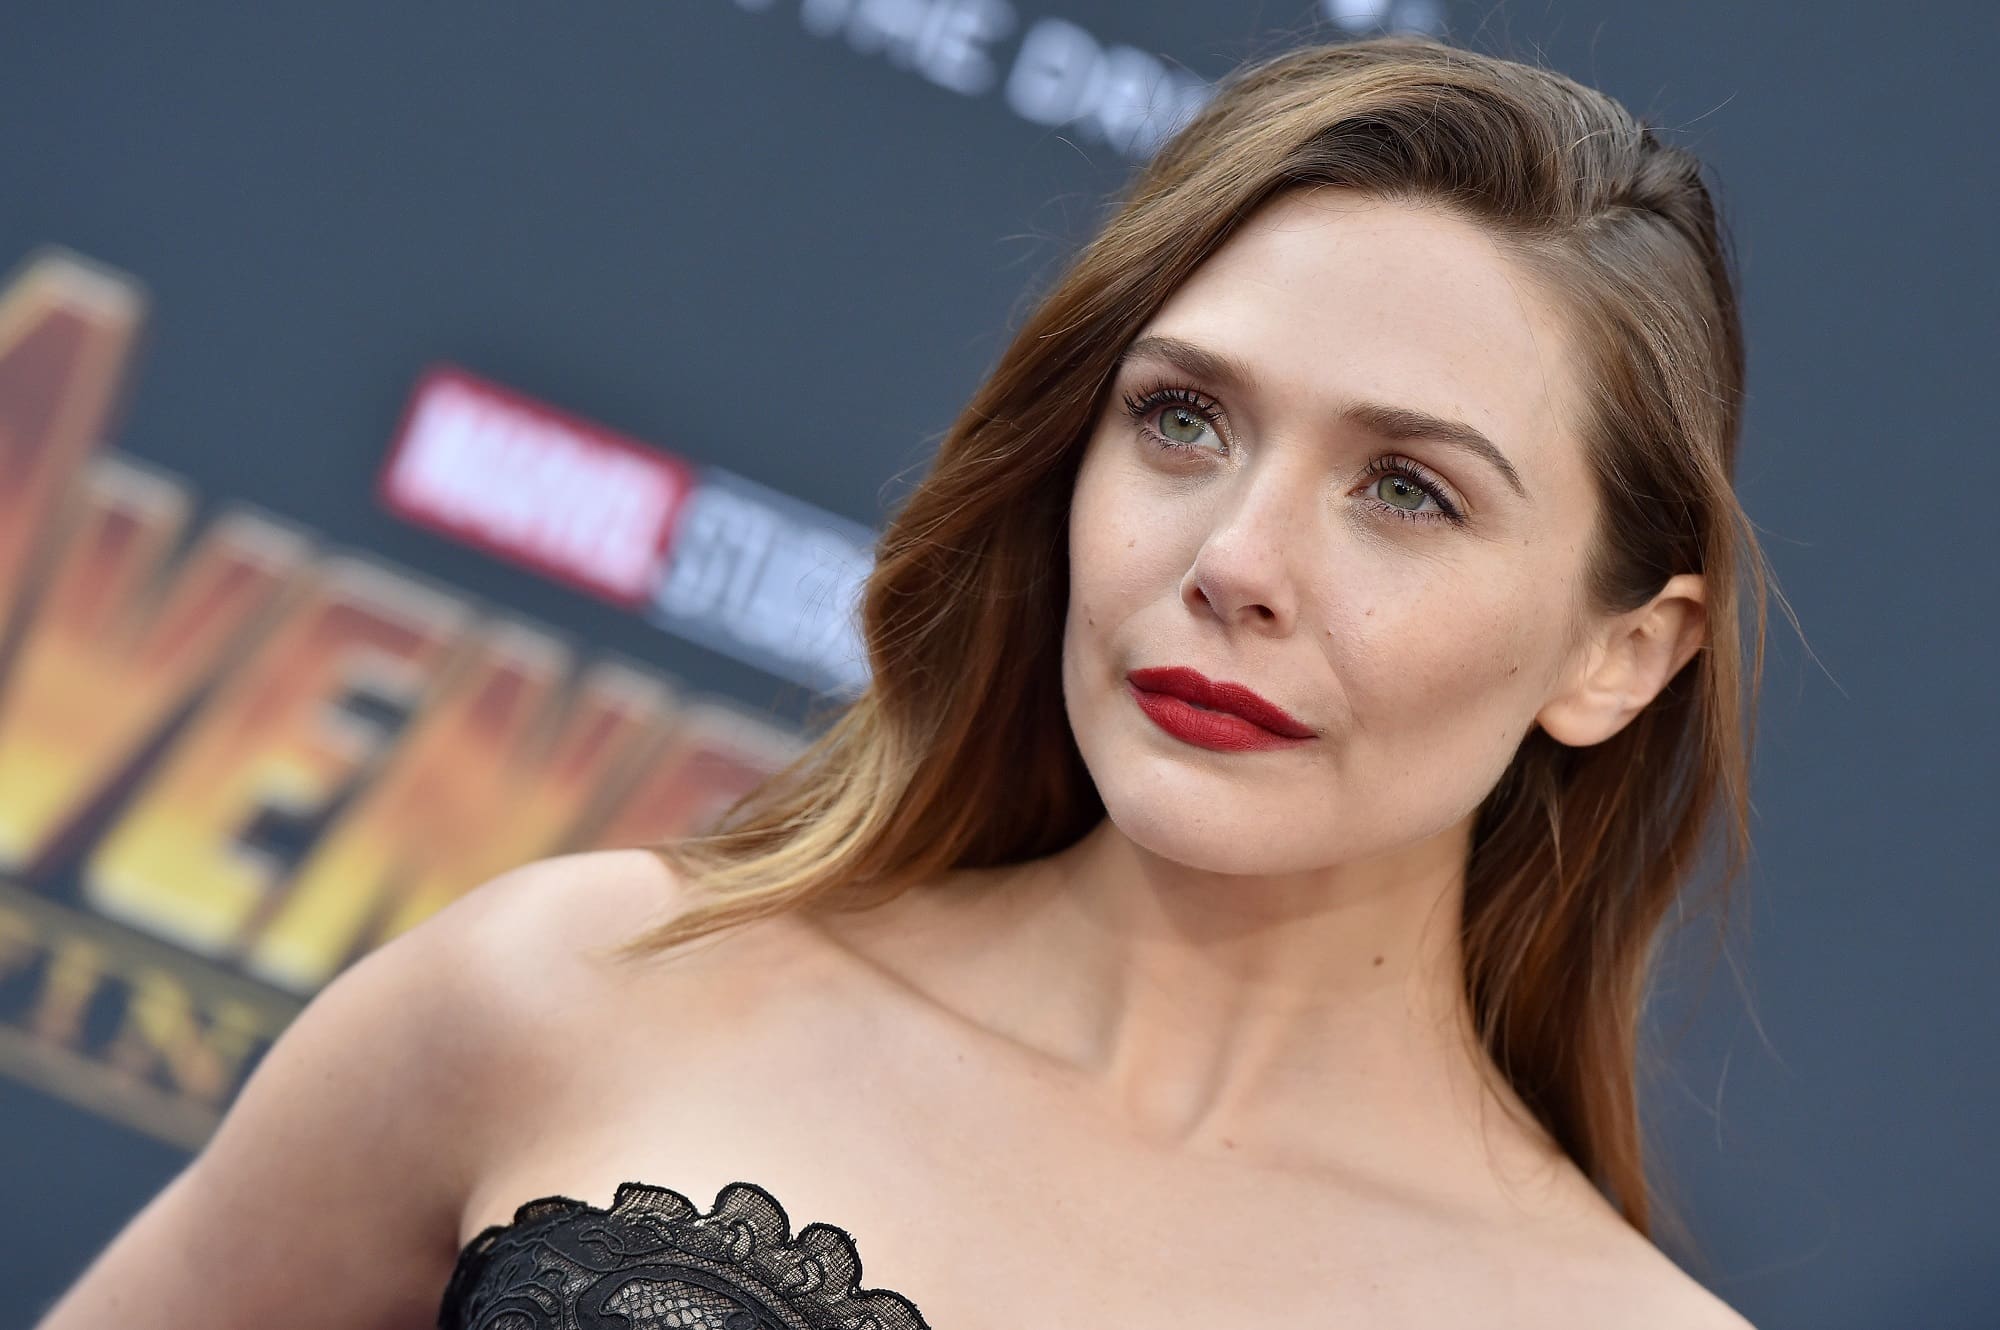 ”elizabeth-olsen-discusses-whether-we-should-expect-a-scarlet-witch-solo-movie-going-forward-in-the-mcu”